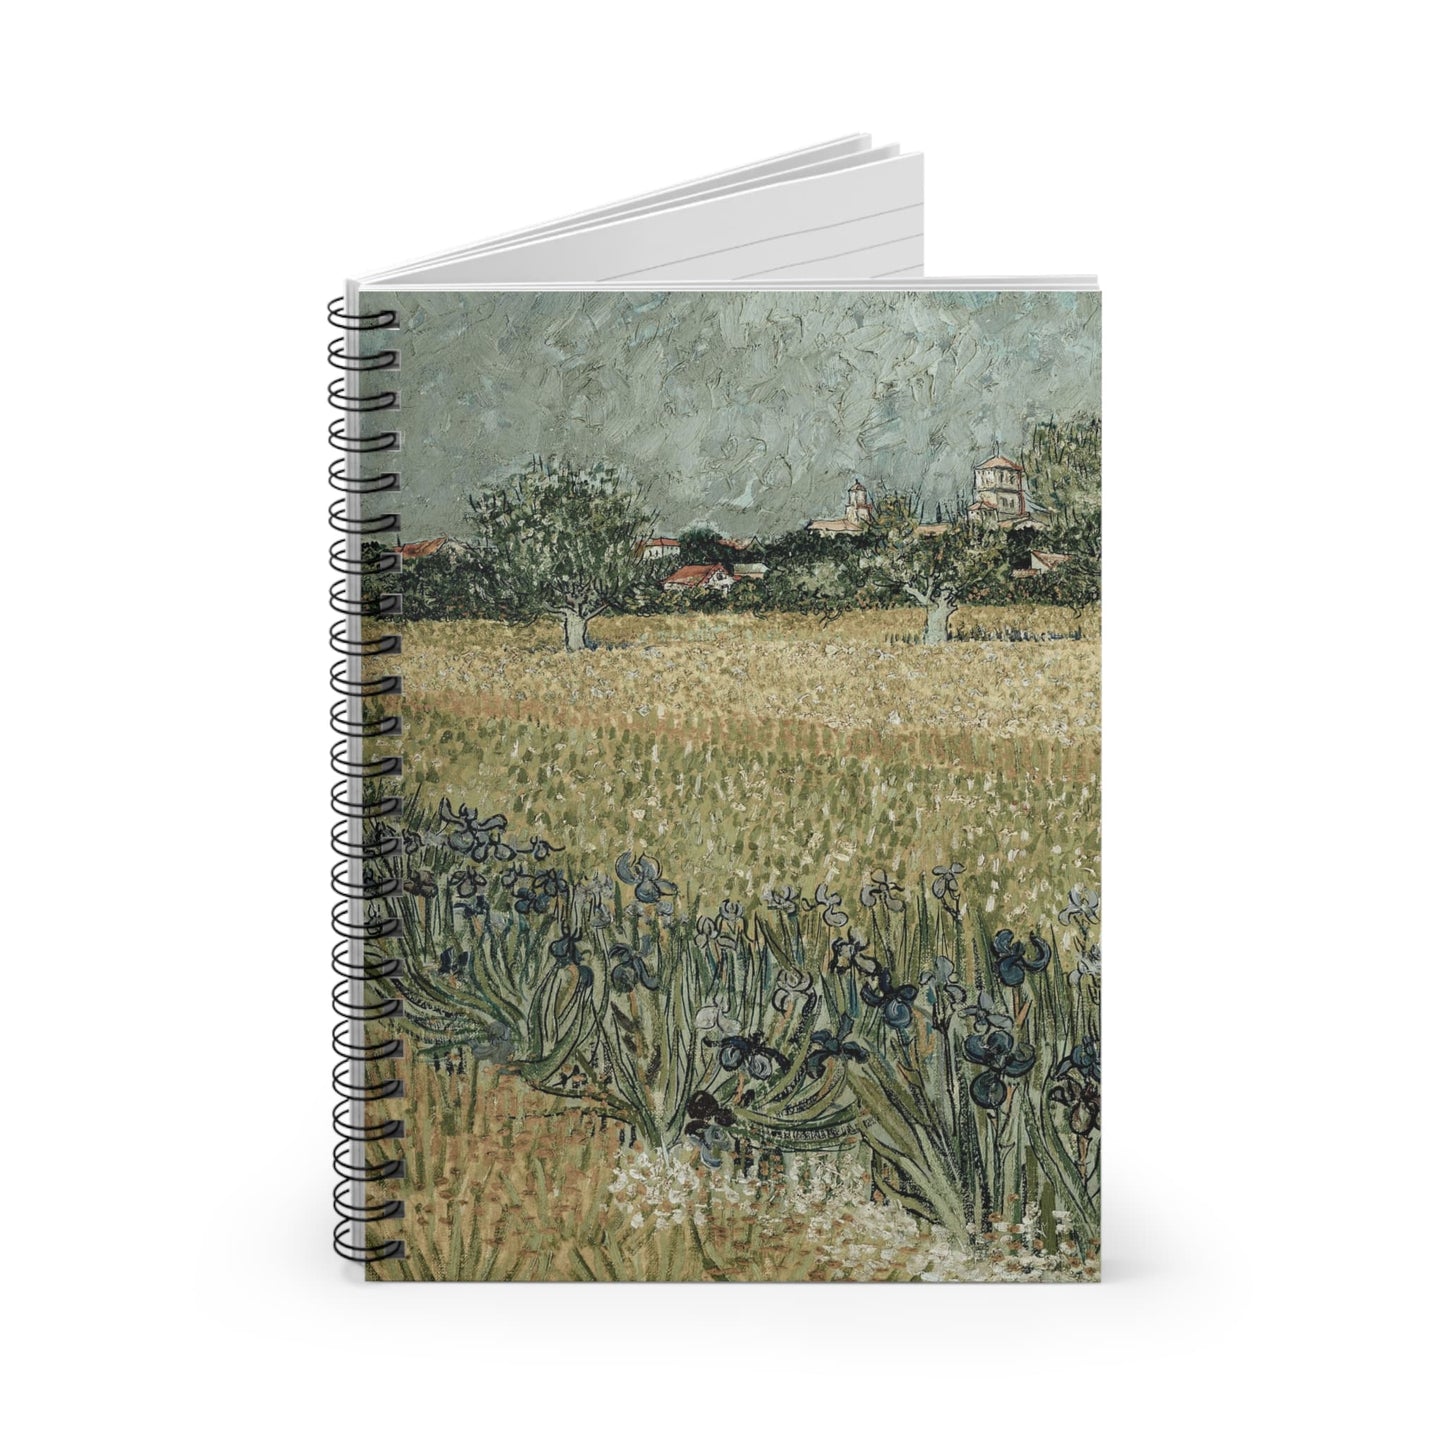 Muted Landscape Spiral Notebook Standing up on White Desk